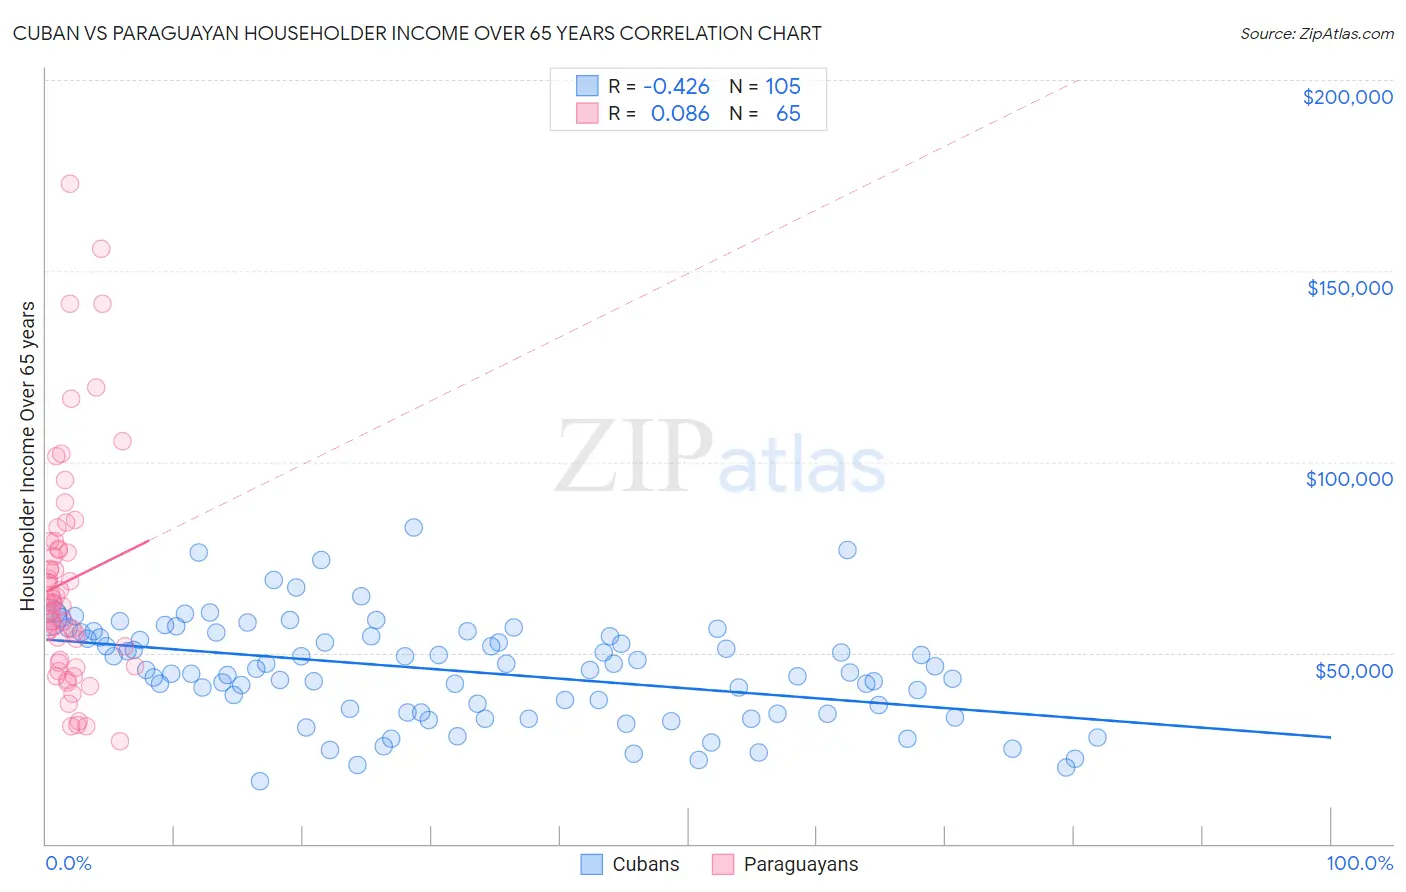 Cuban vs Paraguayan Householder Income Over 65 years